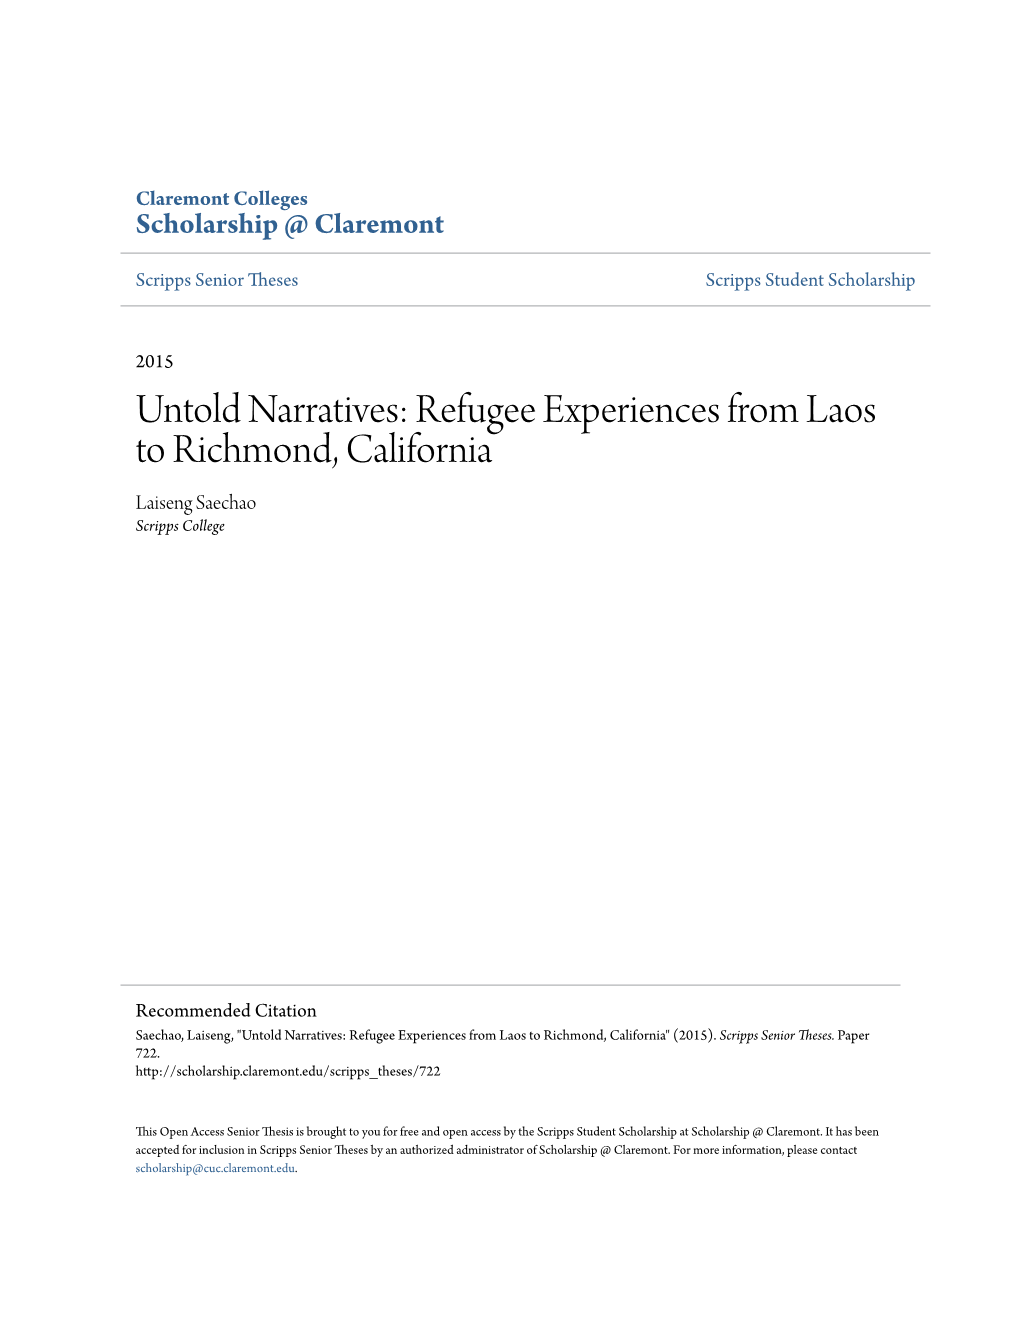 Refugee Experiences from Laos to Richmond, California Laiseng Saechao Scripps College